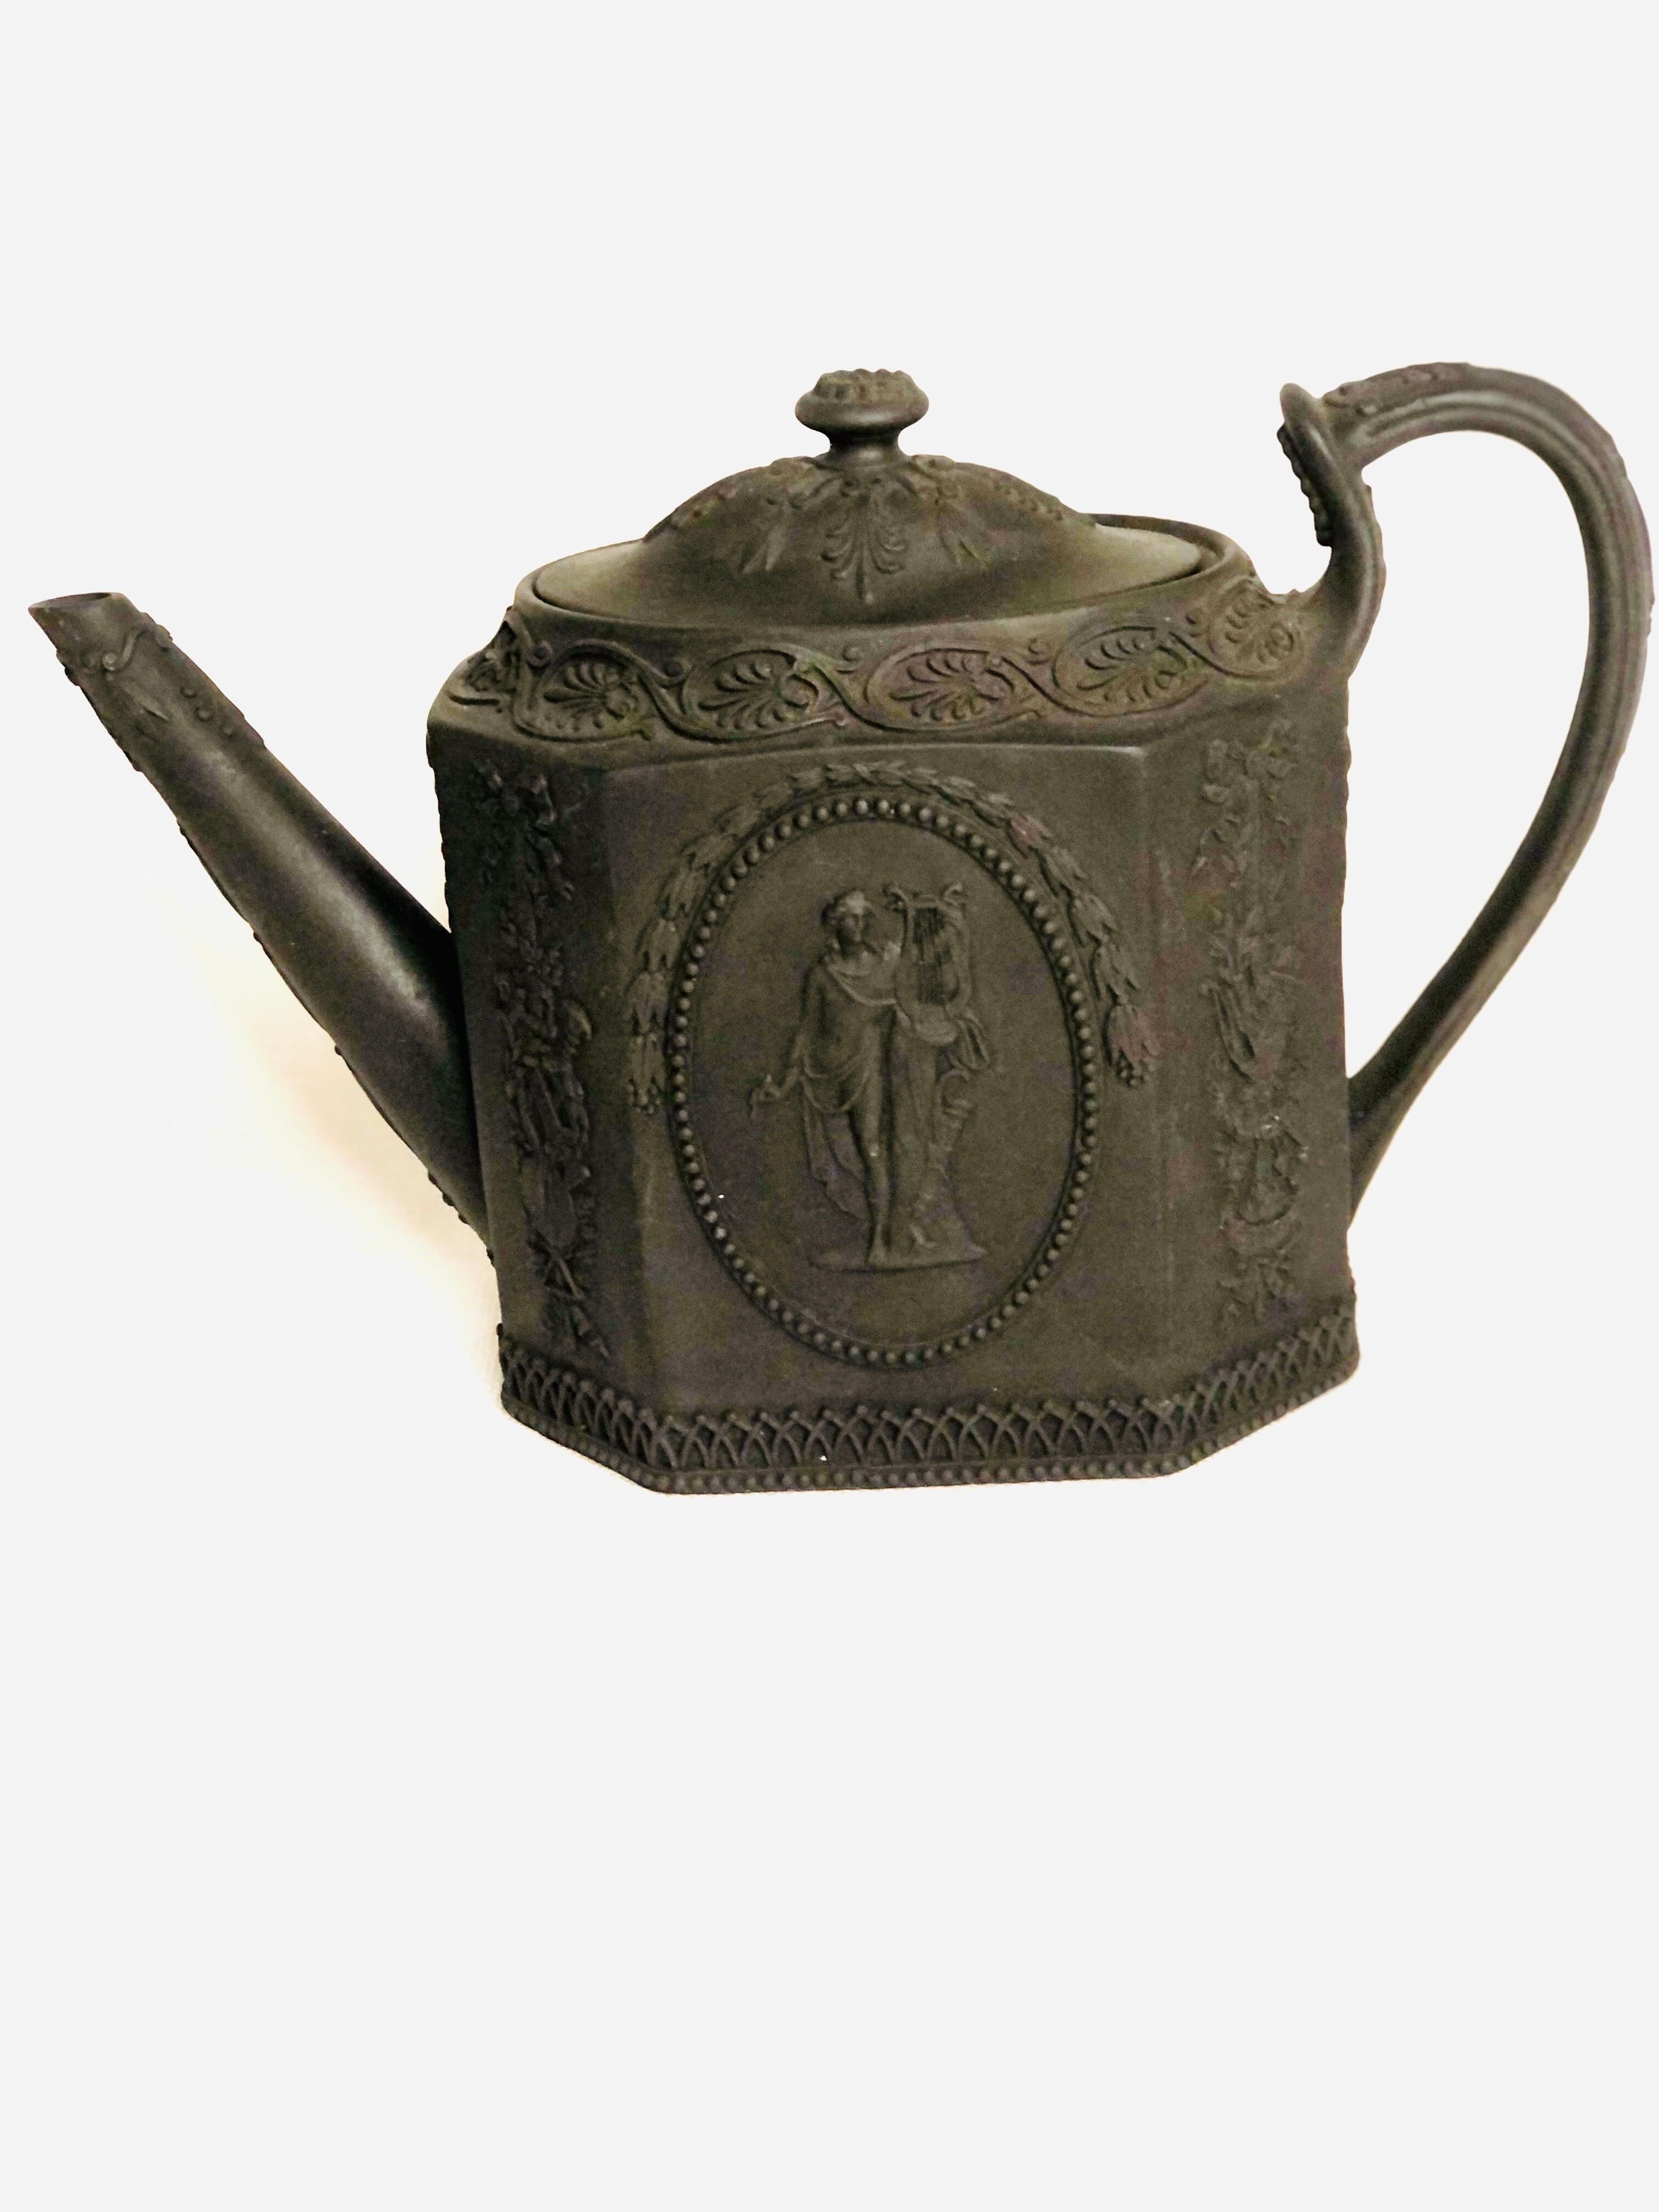 This is a very rare antique Wedgwood Etruria Basalt teapot. It is eight sided and decorated on all sides. One side has a medallion of a man playing a lyre, while the other side has a medallion of a pensive woman leaning on a plinth. There are